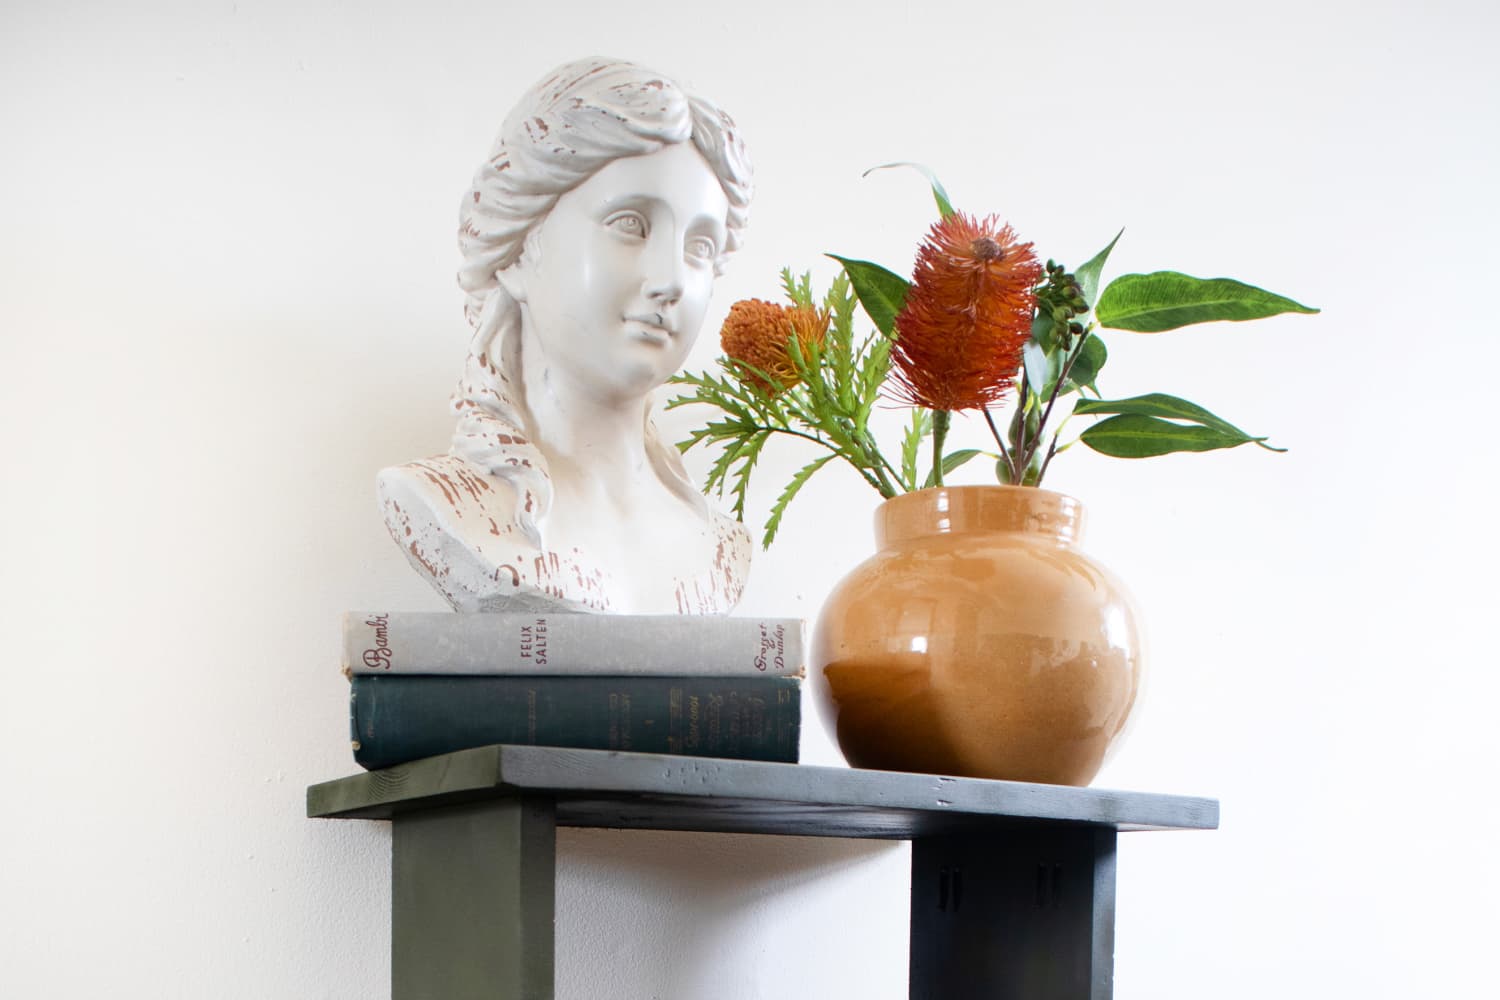  Sculptures - Home Décor Accents: Home & Kitchen: Statues, Wall  Sculptures, Busts & More